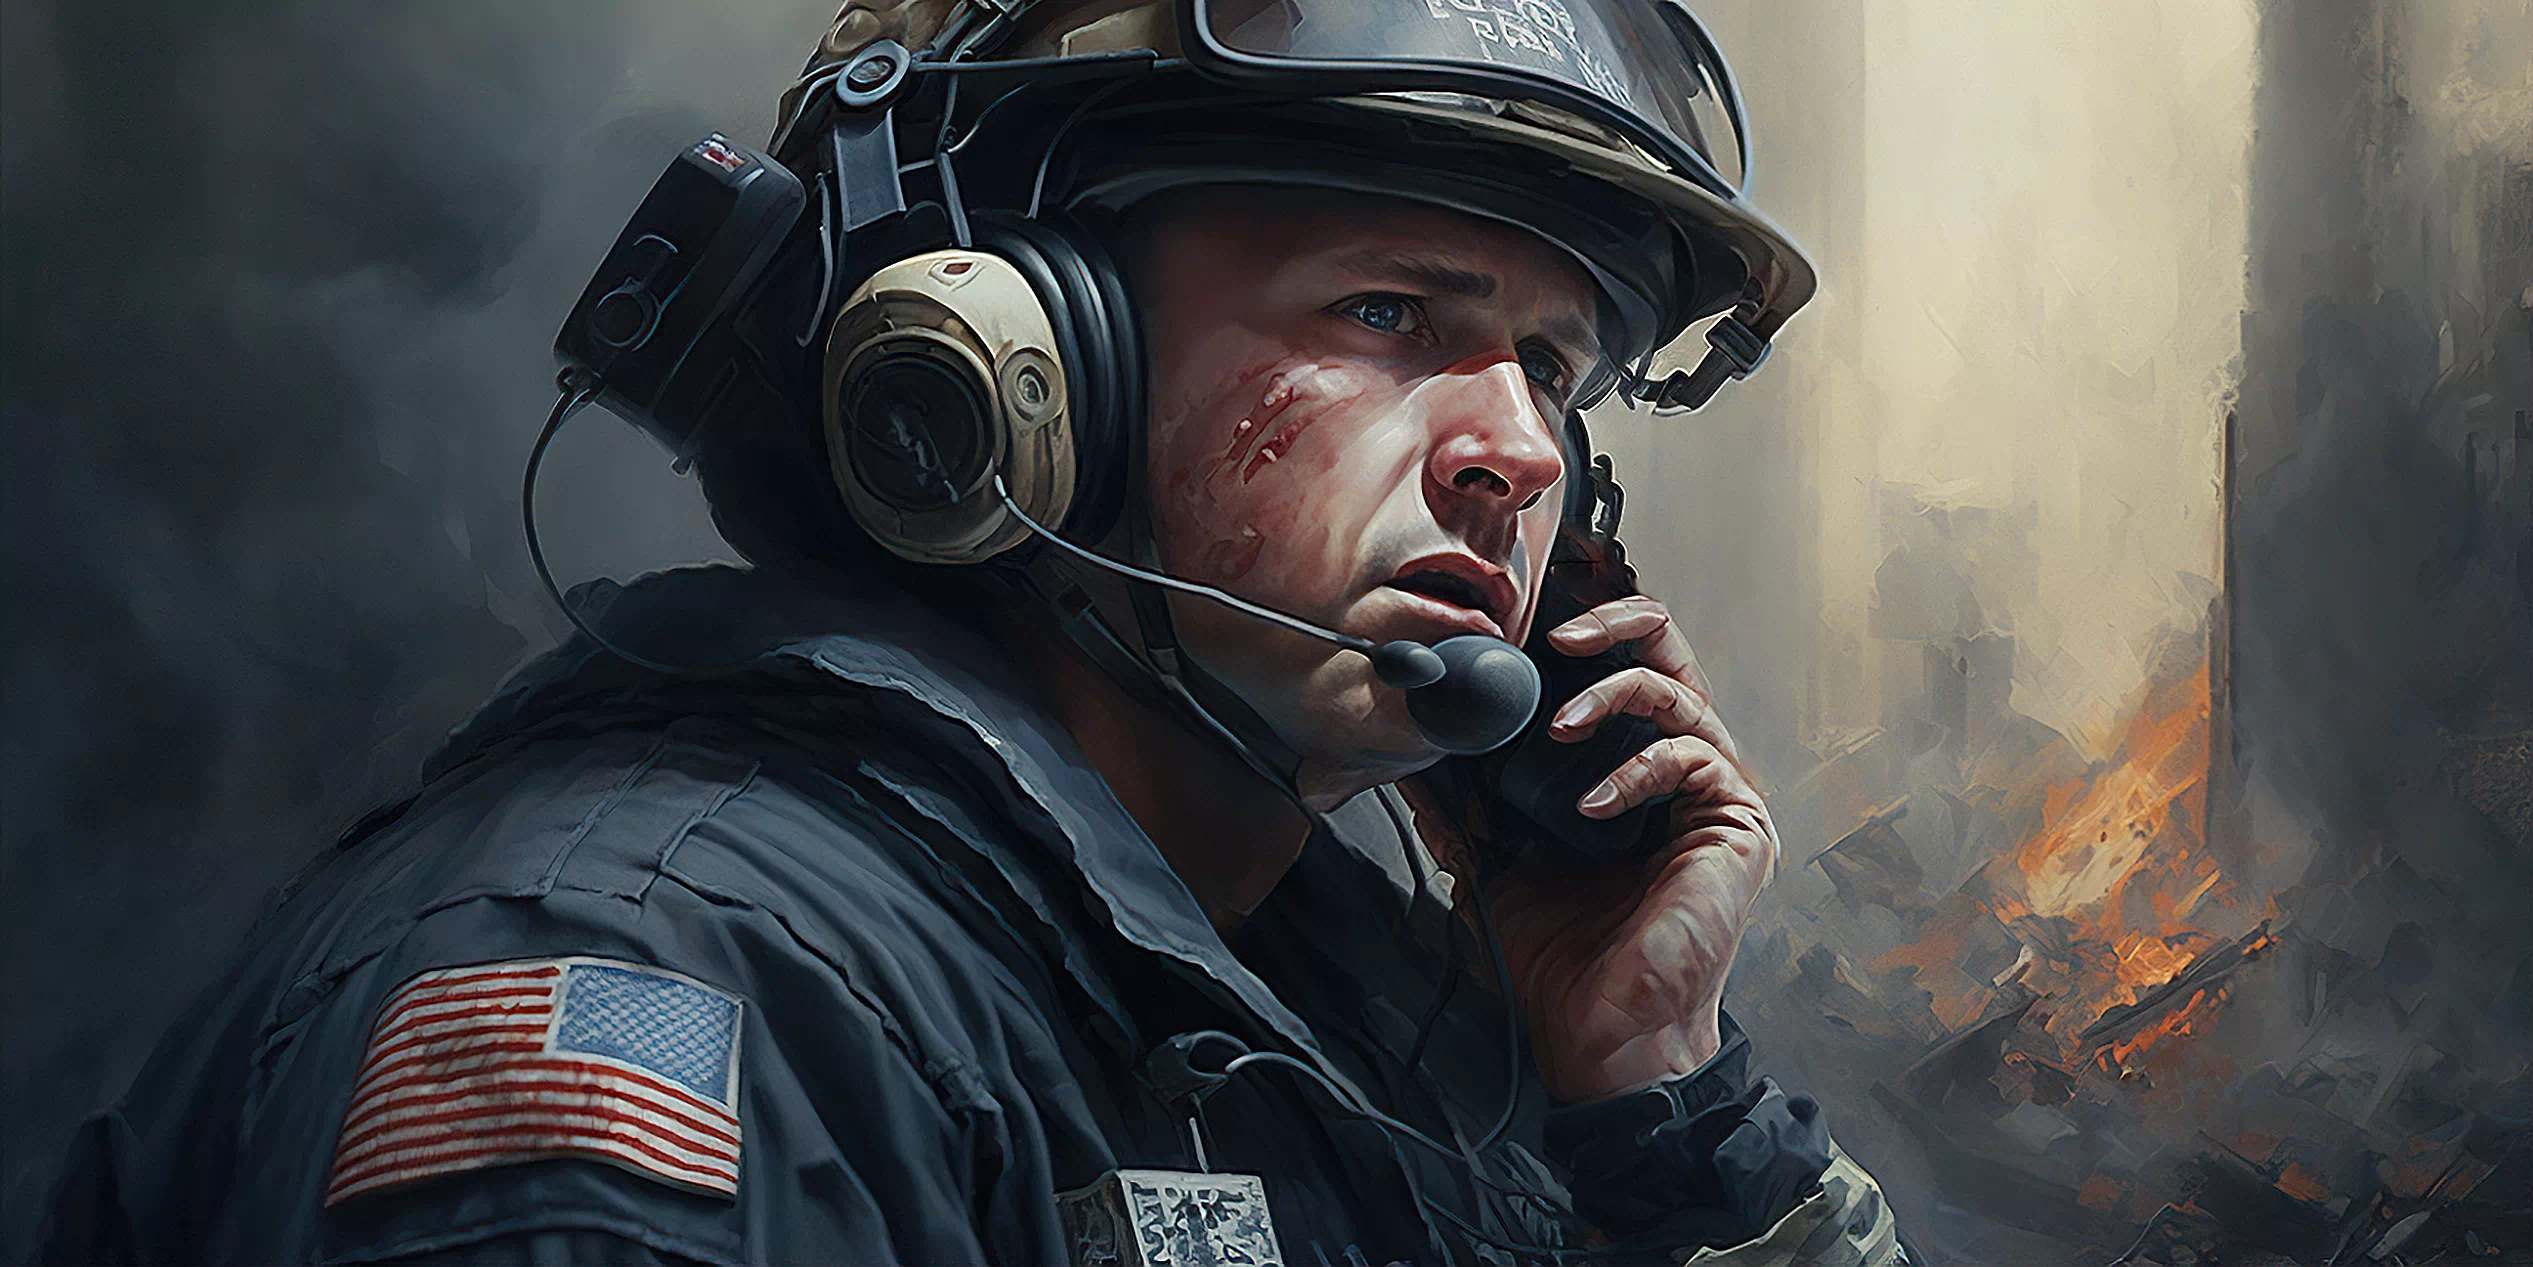 Heroes For Hope: Rising Beyond The Ashes Thriving Beyond 9/11 3